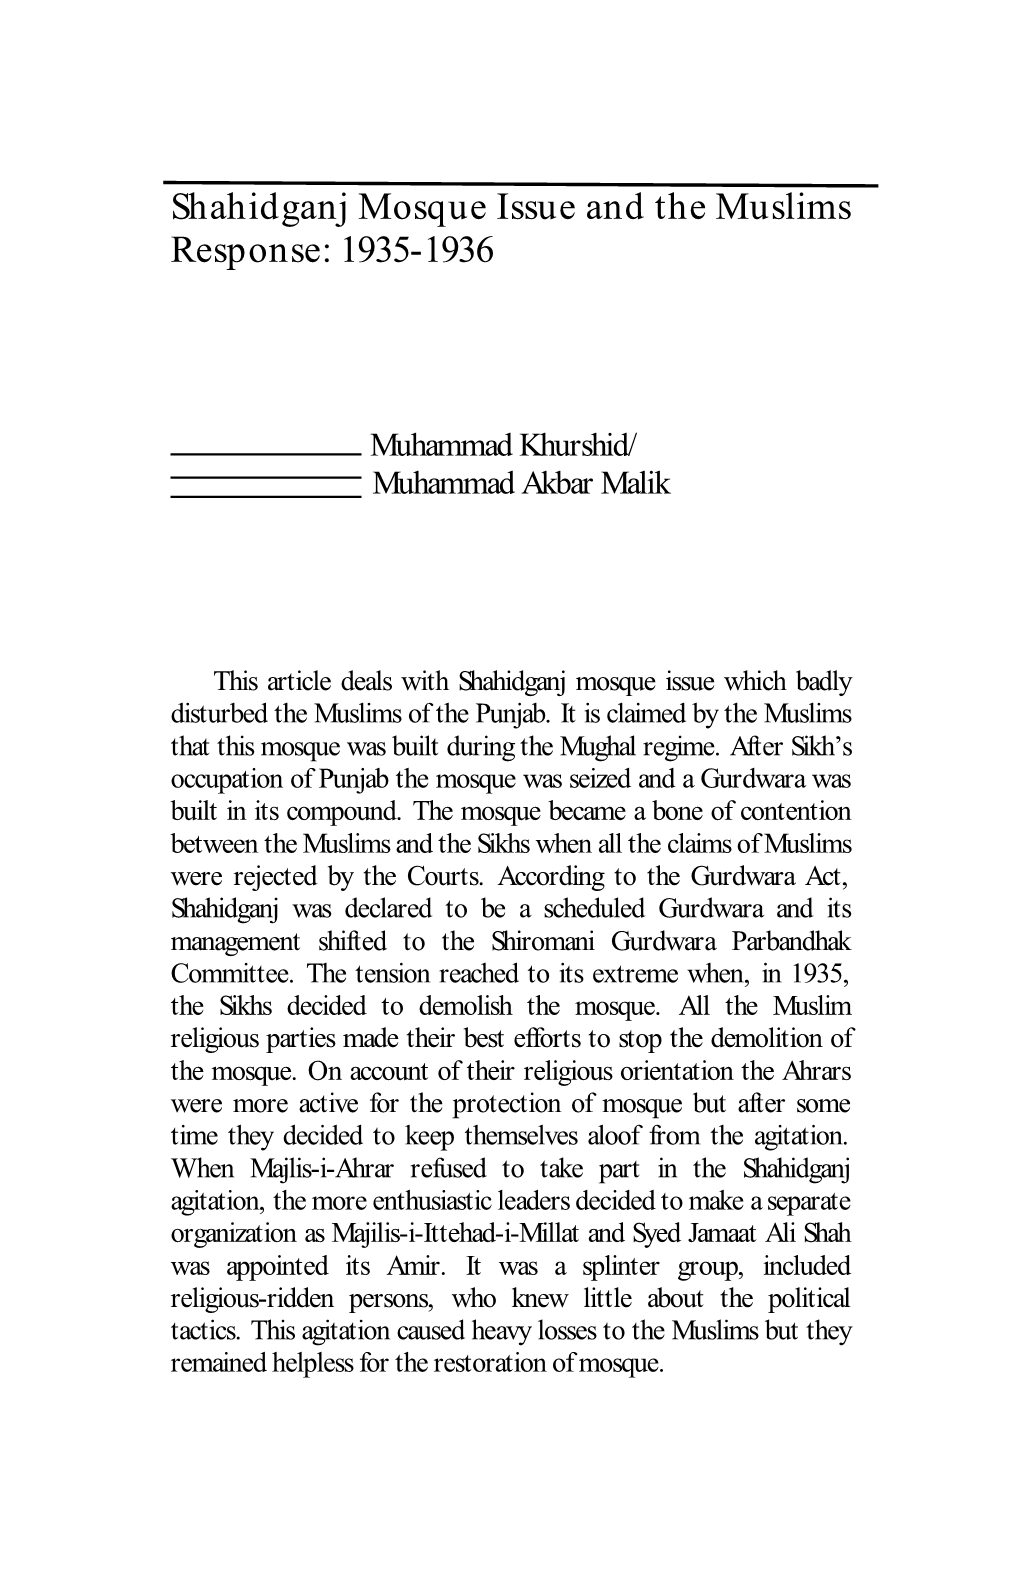 Shahidganj Mosque Issue and the Muslims Response: 1935-1936